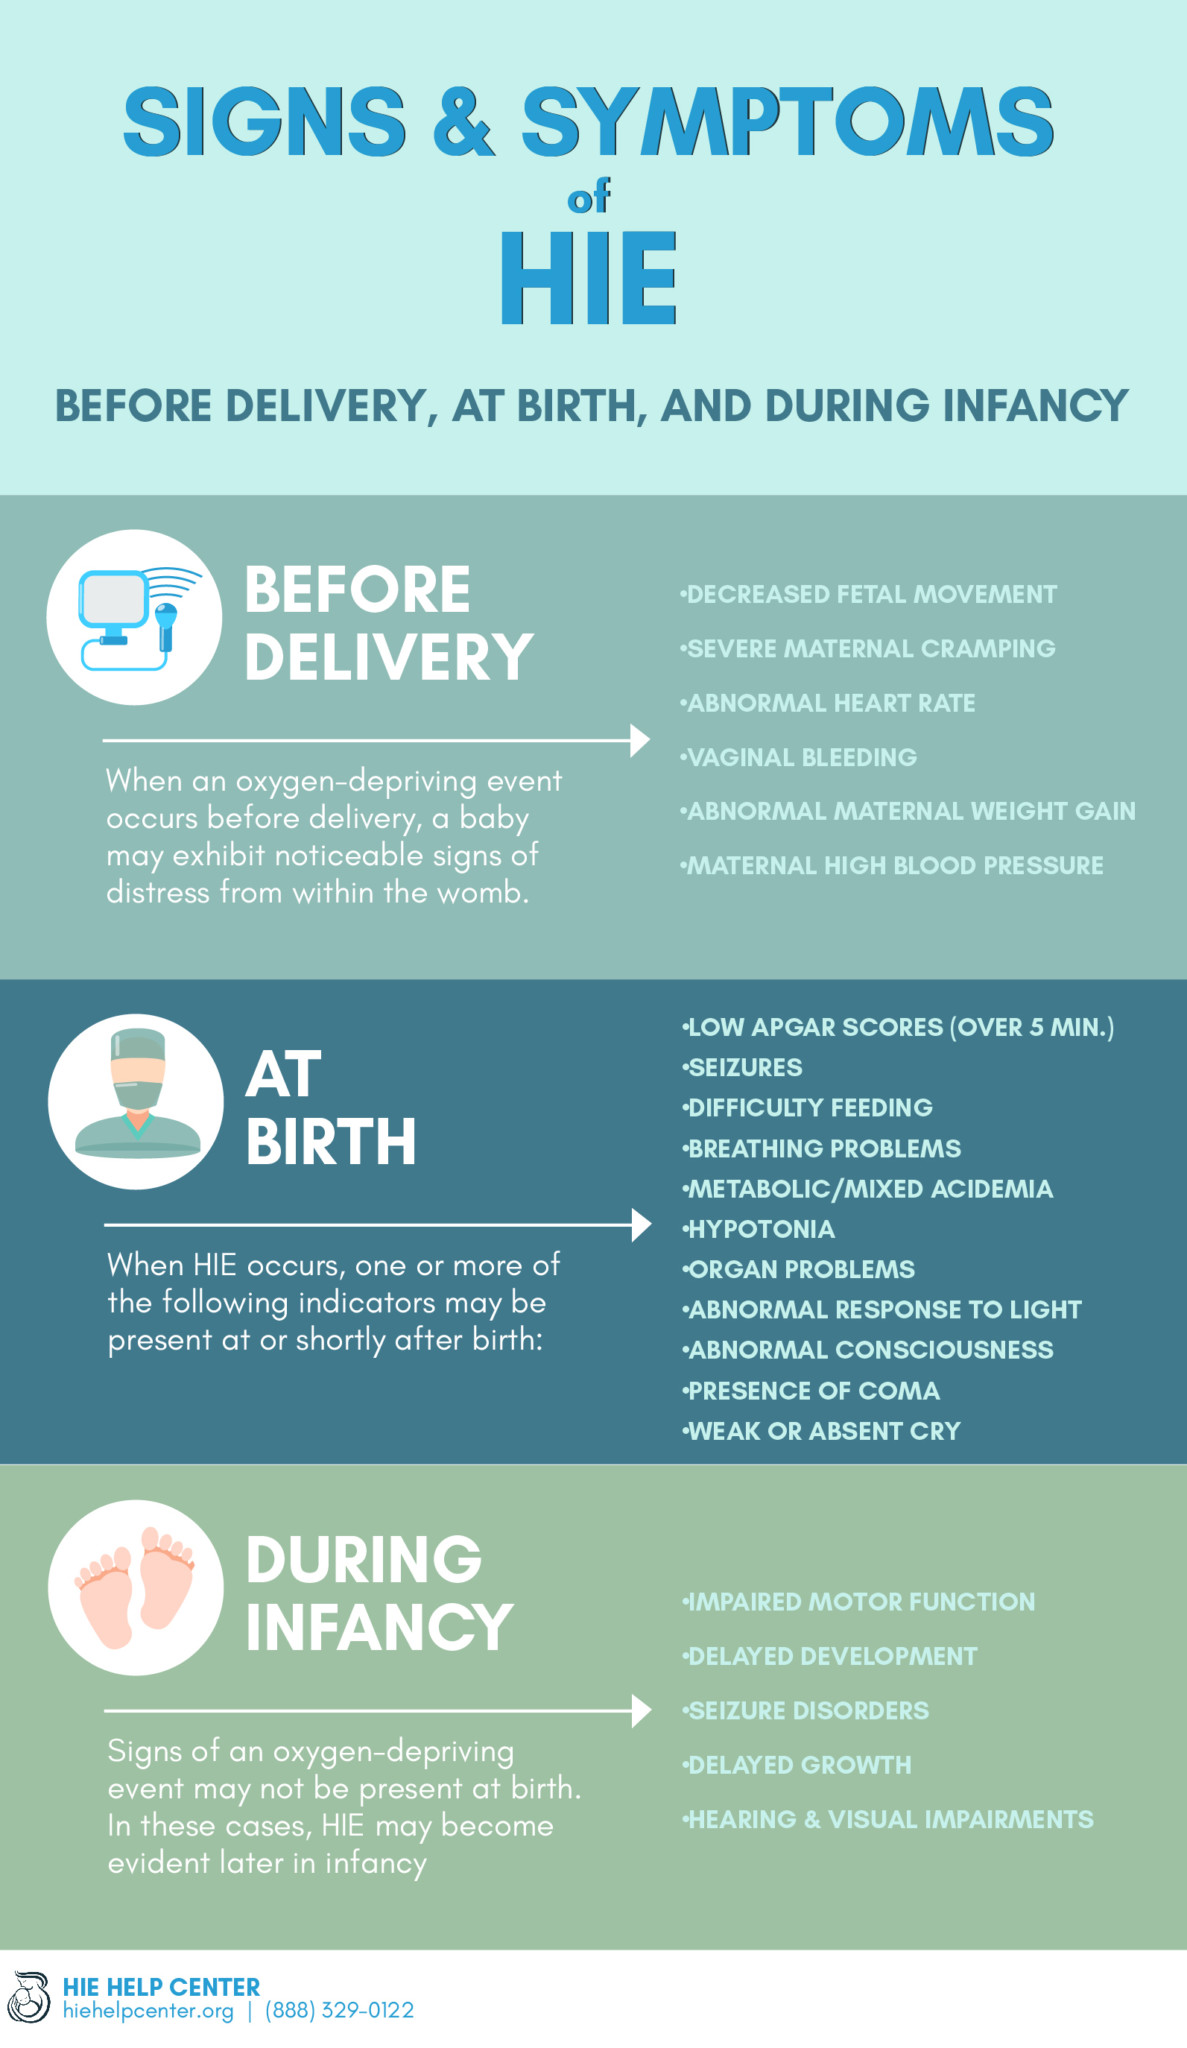 Signs and Symptoms of HIE - Before Birth, During Birth, and During Infancy